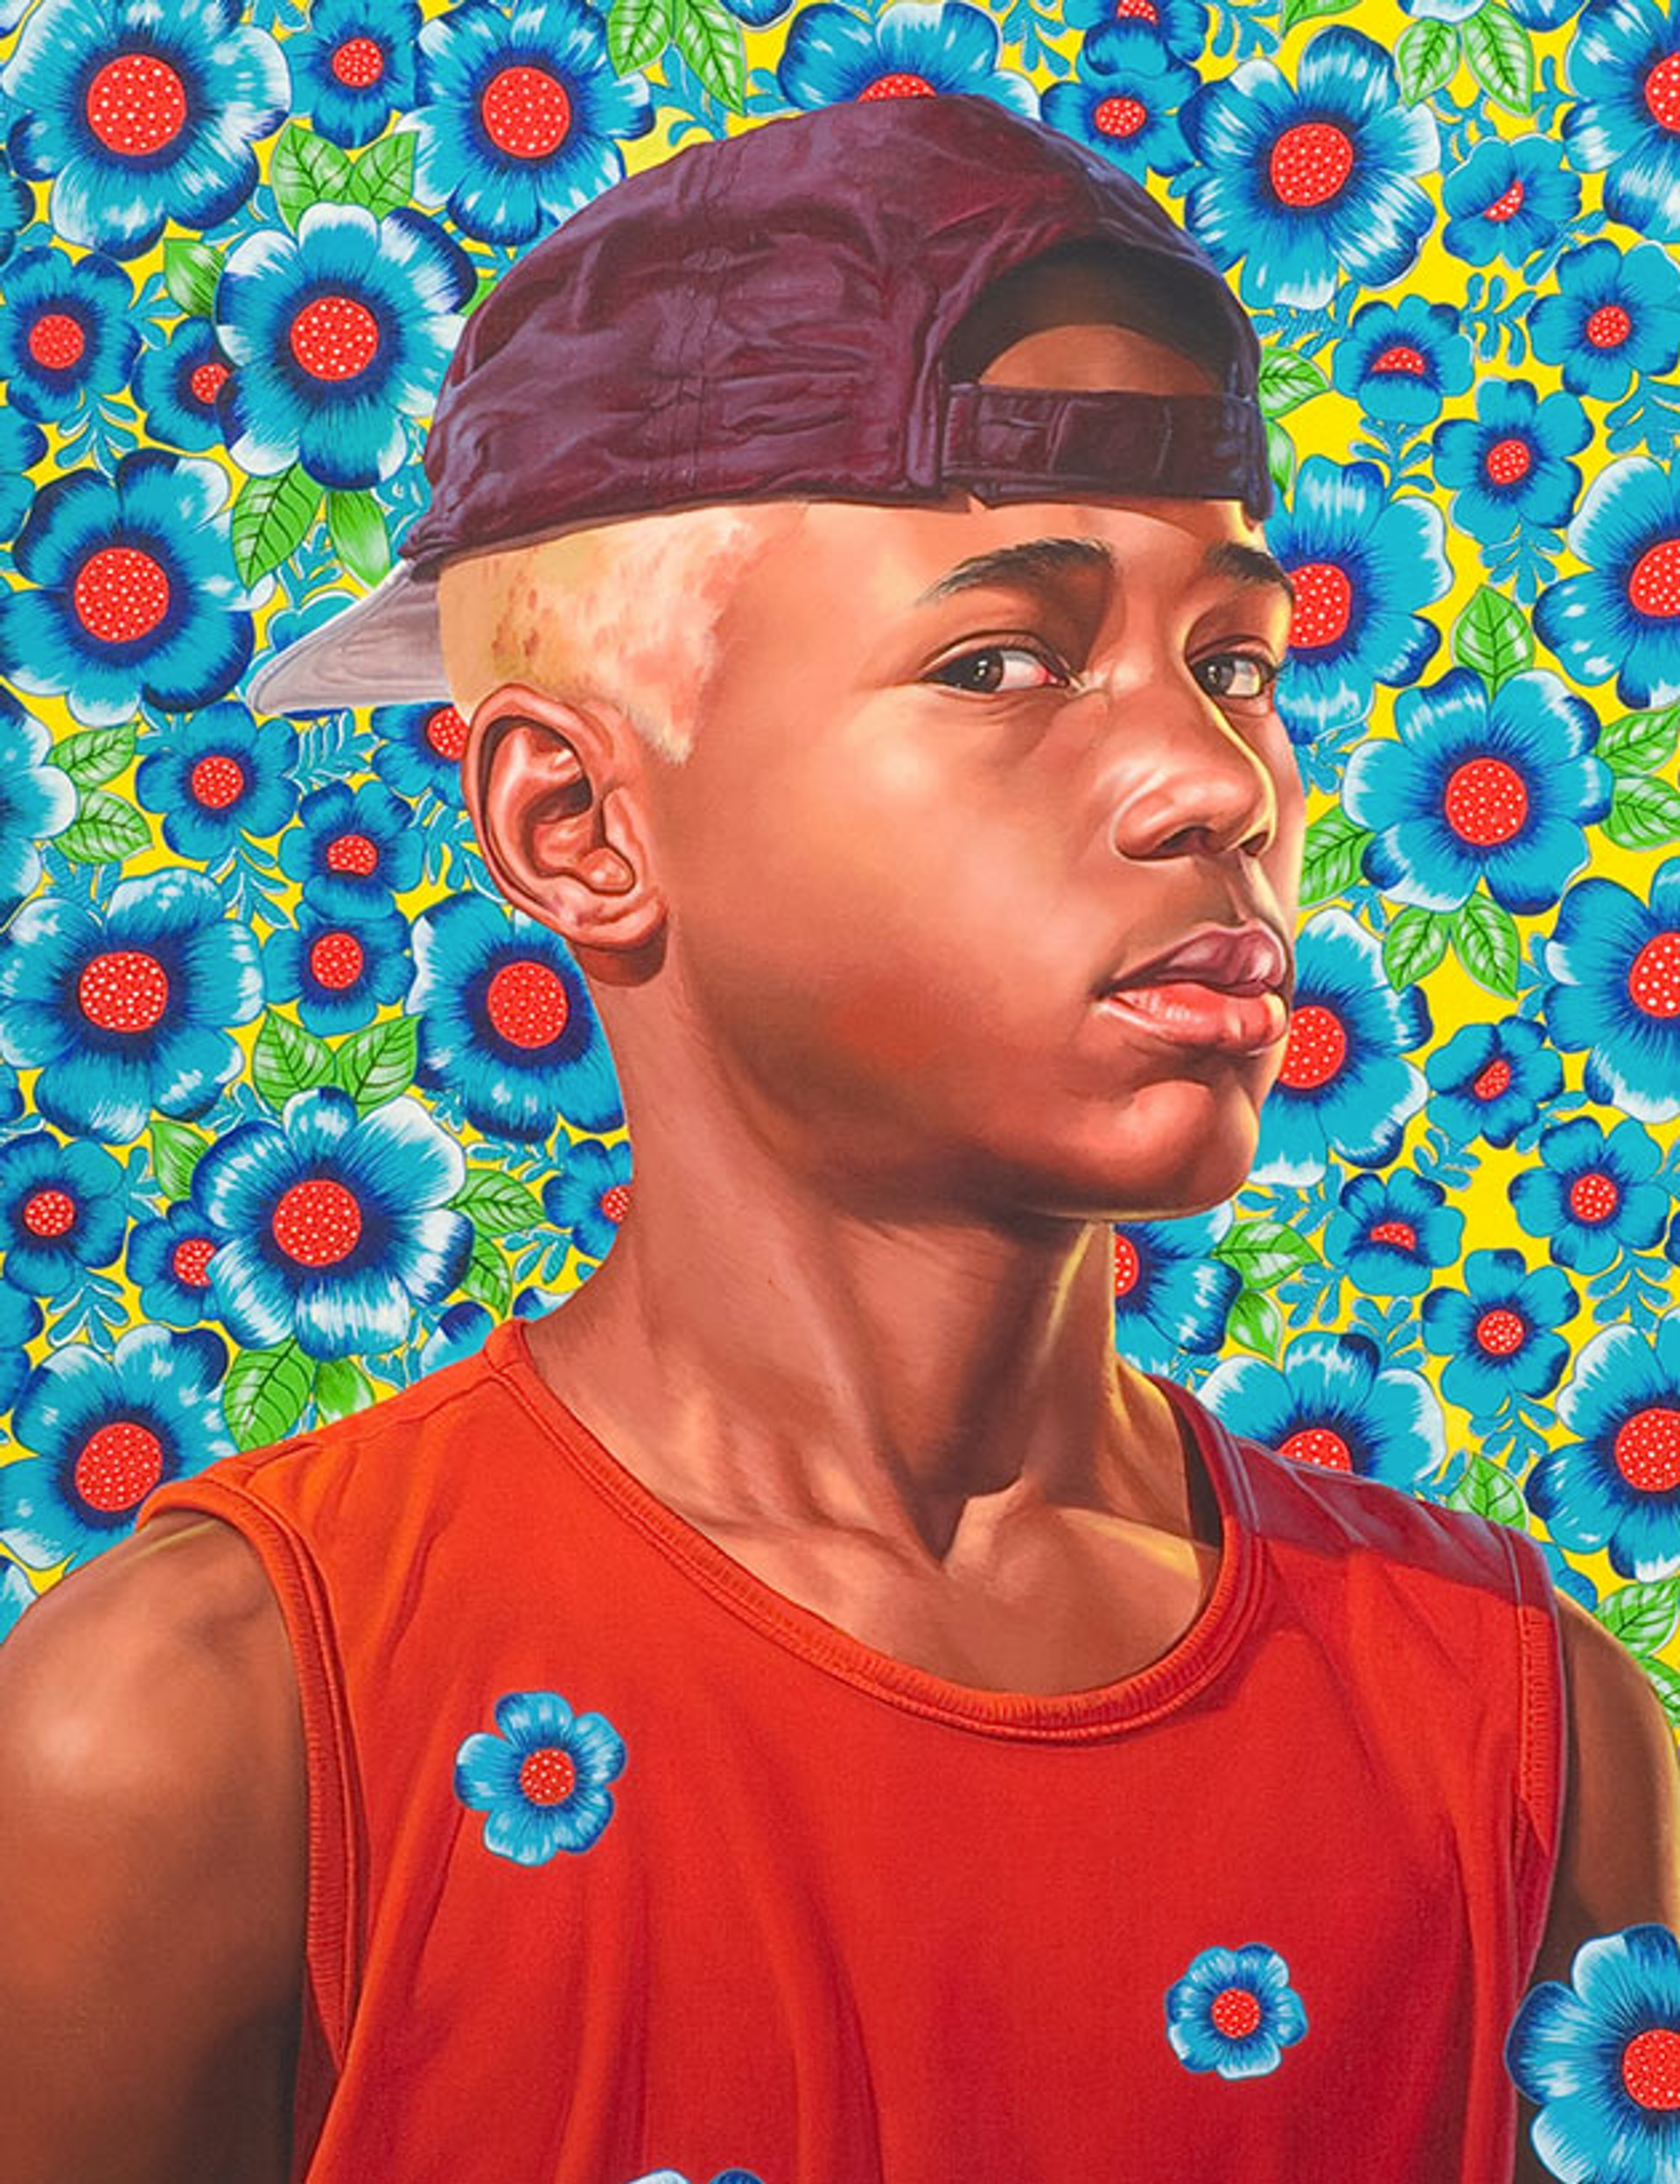 Kehinde Wiley’s Randerson Romulado Cordeiro. A macro portrait of a boy with blonde hair and a baseball cap in black, wearing a red tank top in front of a floral background with the same flowers in front of him, on his shirt.